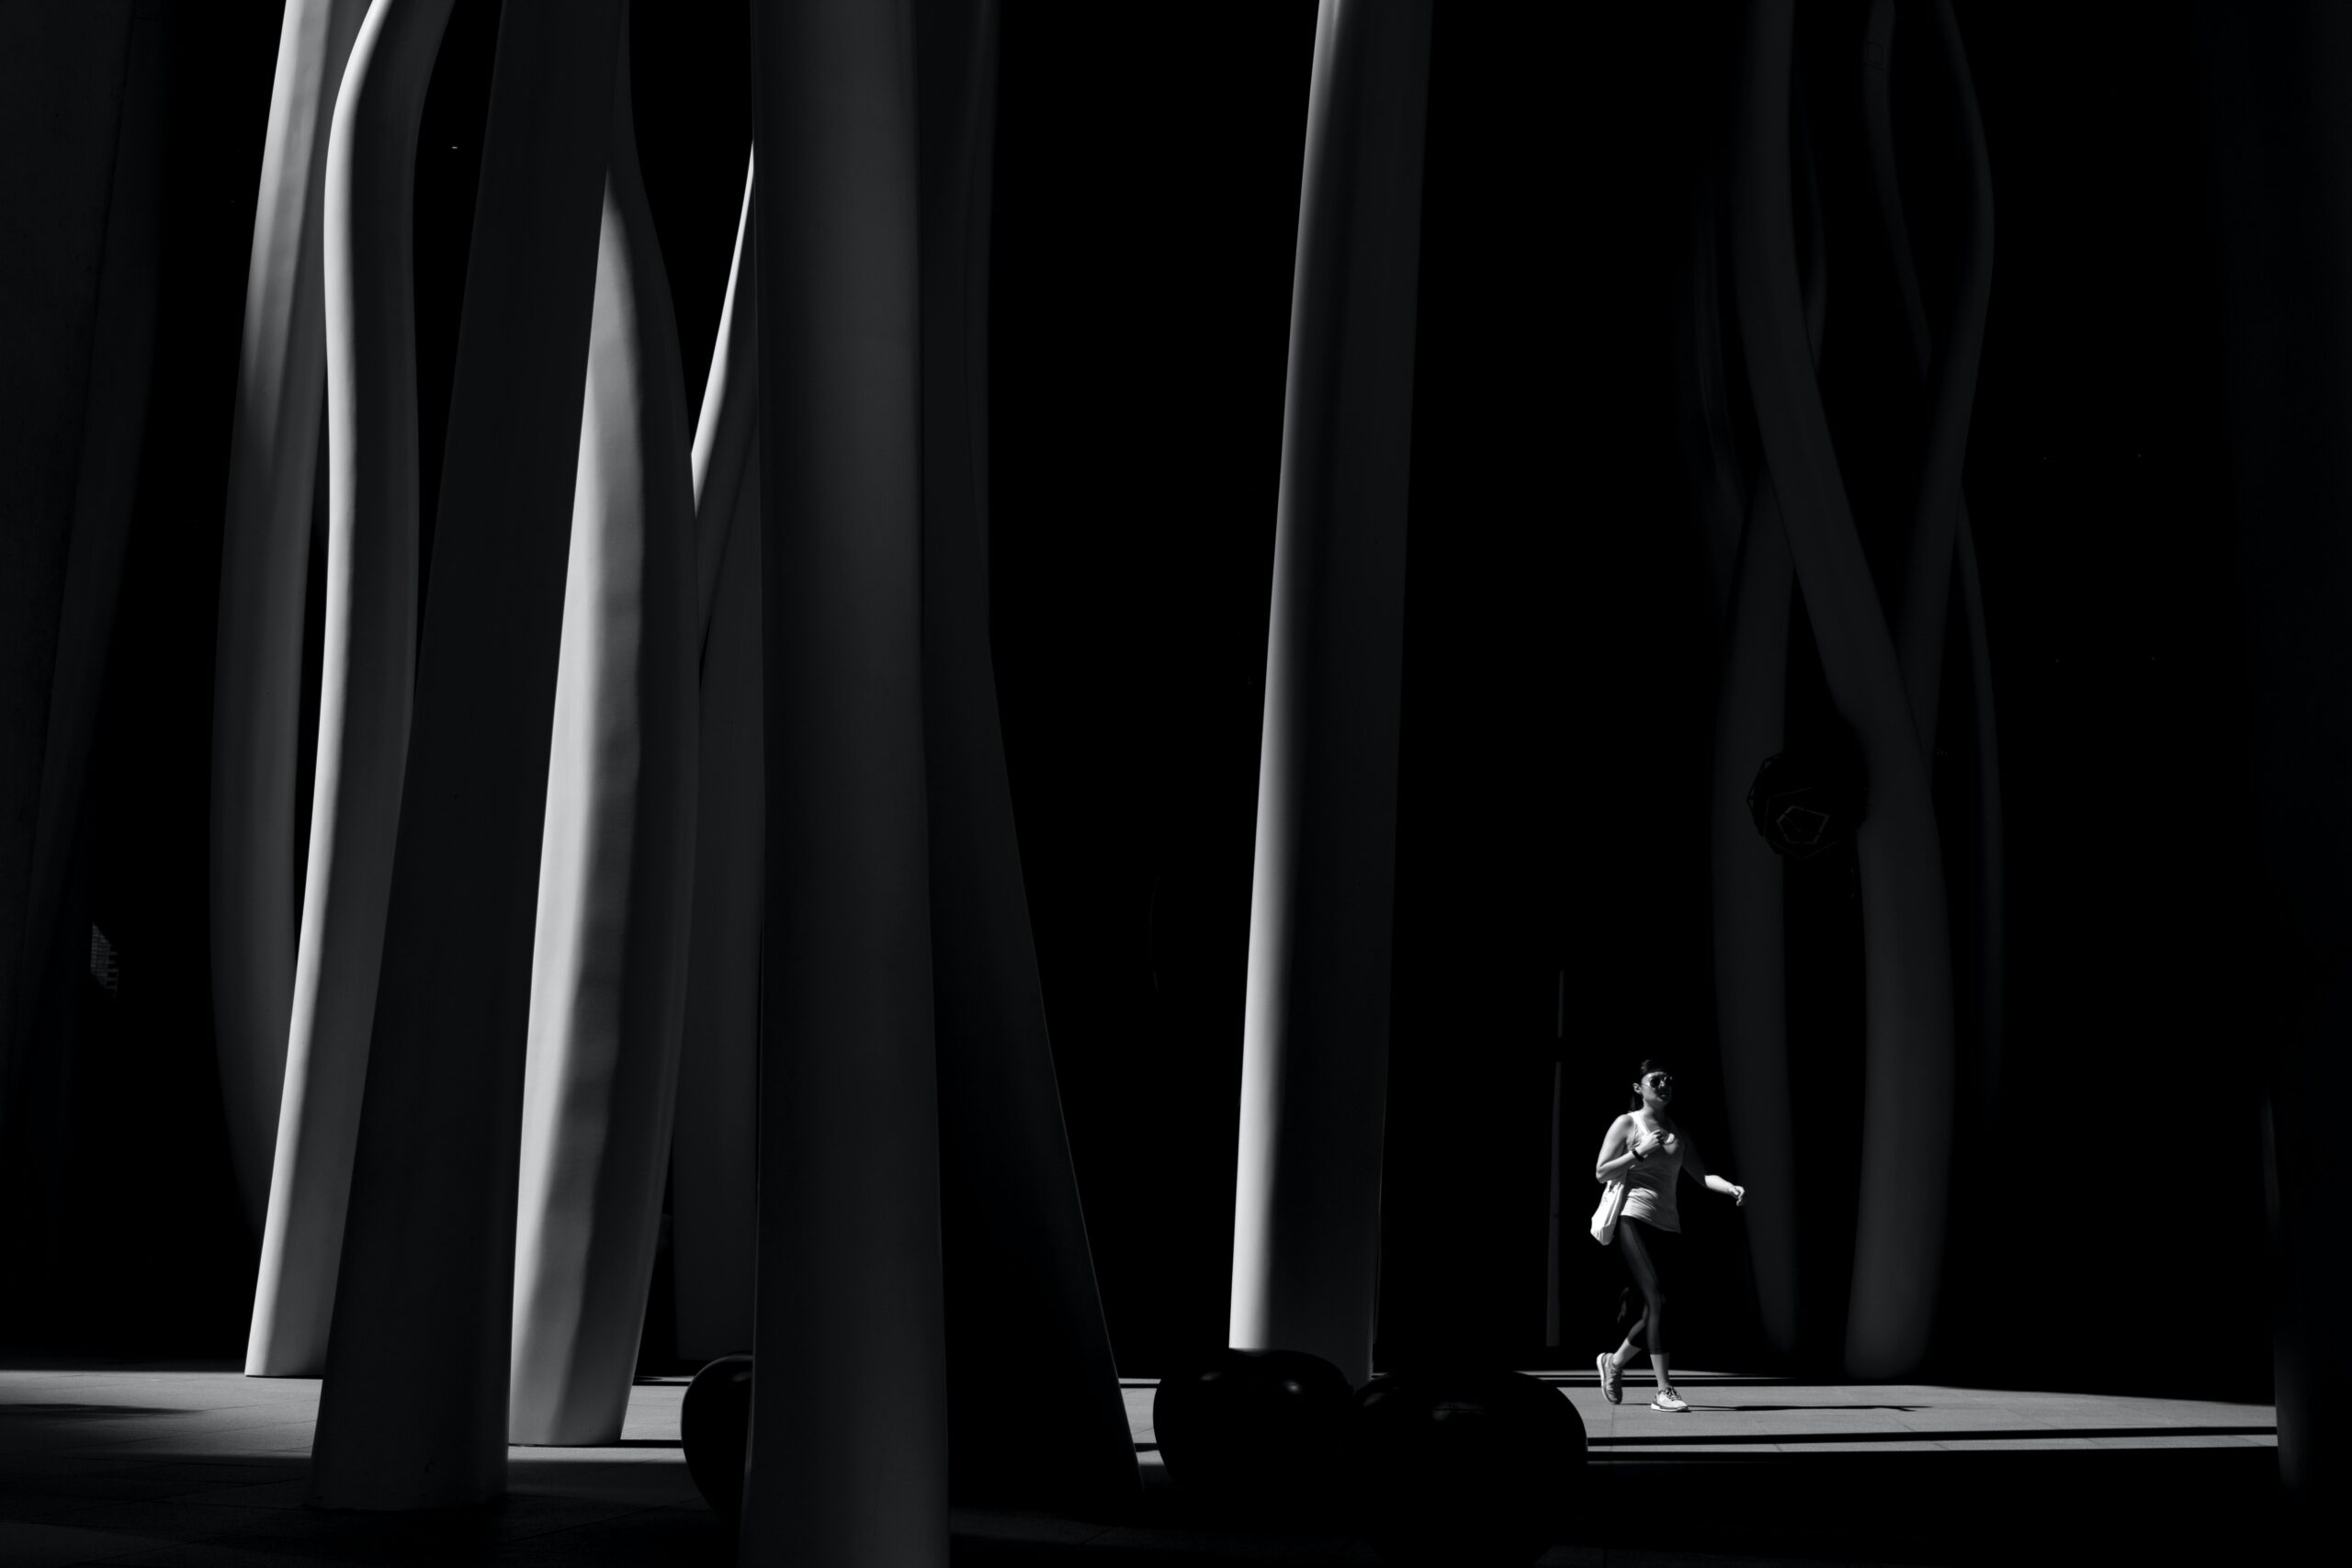 Grayscale Photo of Person Wearing Black Pants Walking Across Posts.